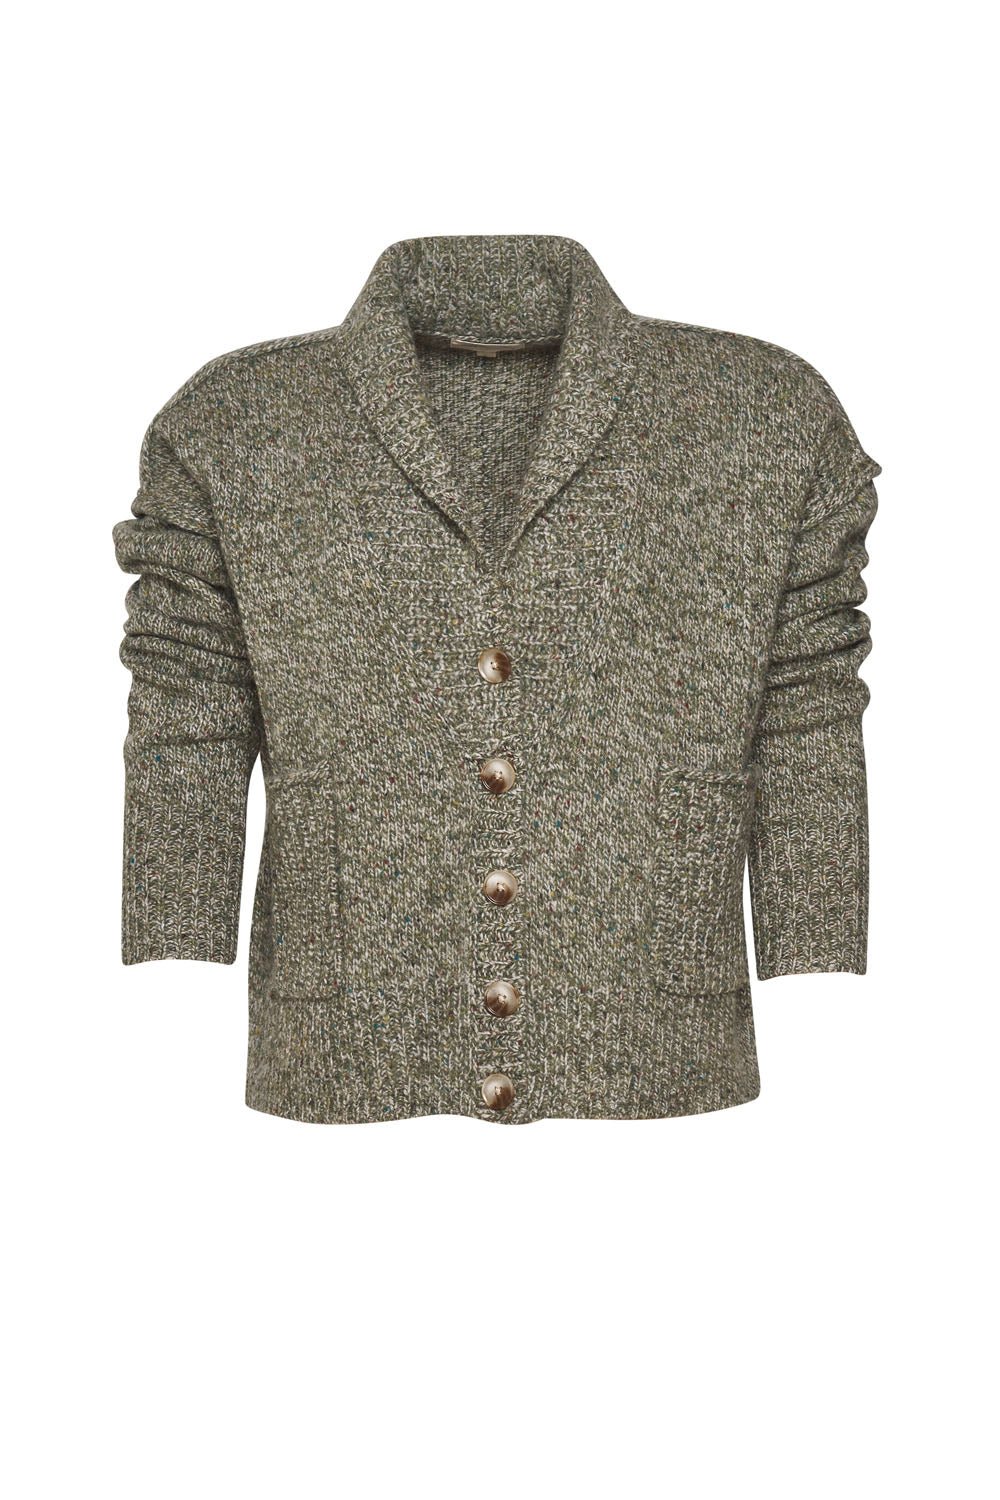 Shop Miss Mossy Cardi | Olive Multi - Madly Sweetly